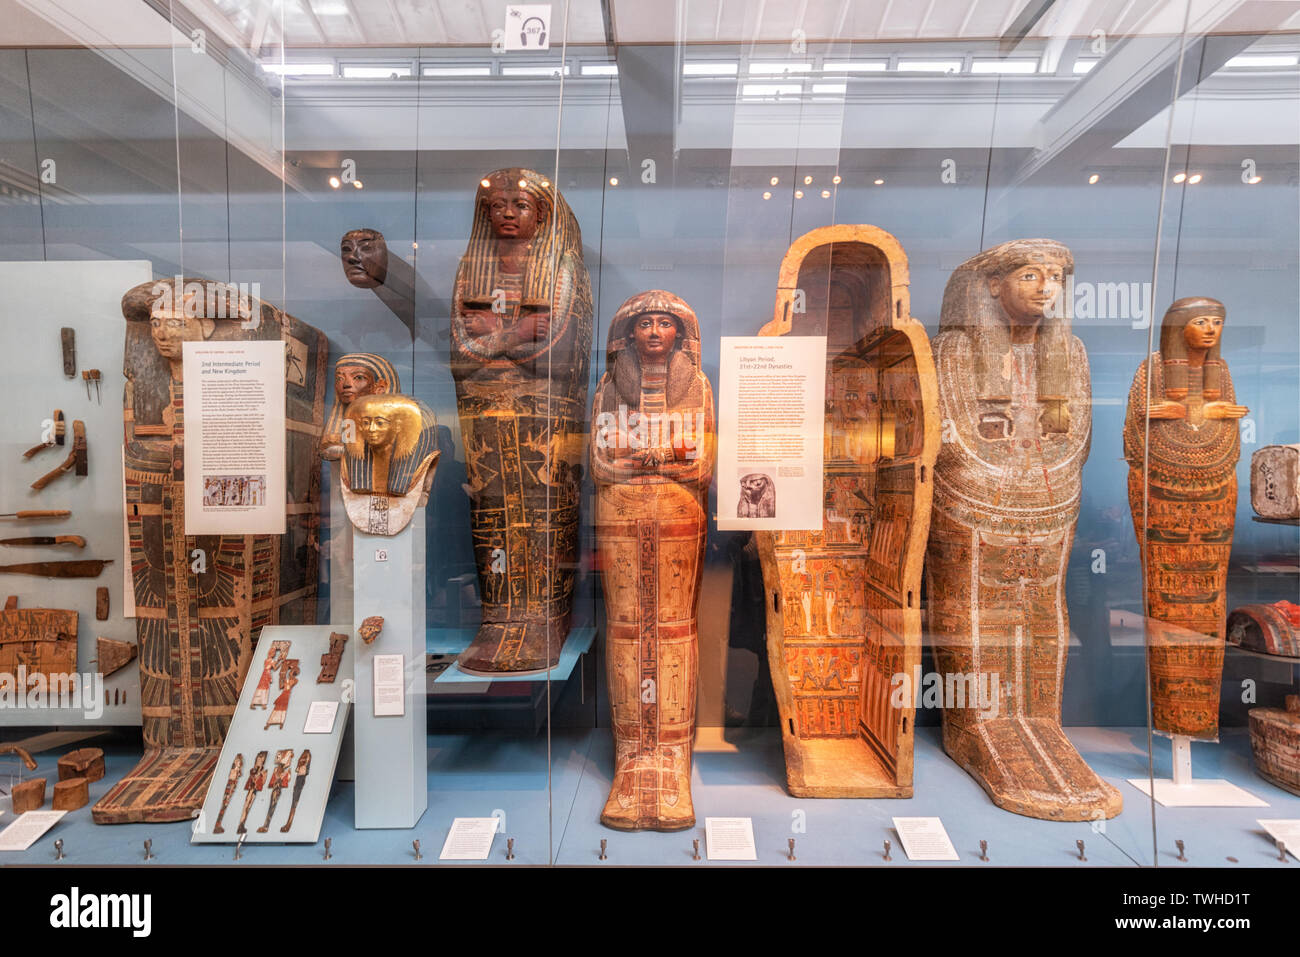 London, United Kingdom - May 13, 2019: The British Museum, London. Hall of Ancient Egypt, Ancient mummies exhibition . Stock Photo